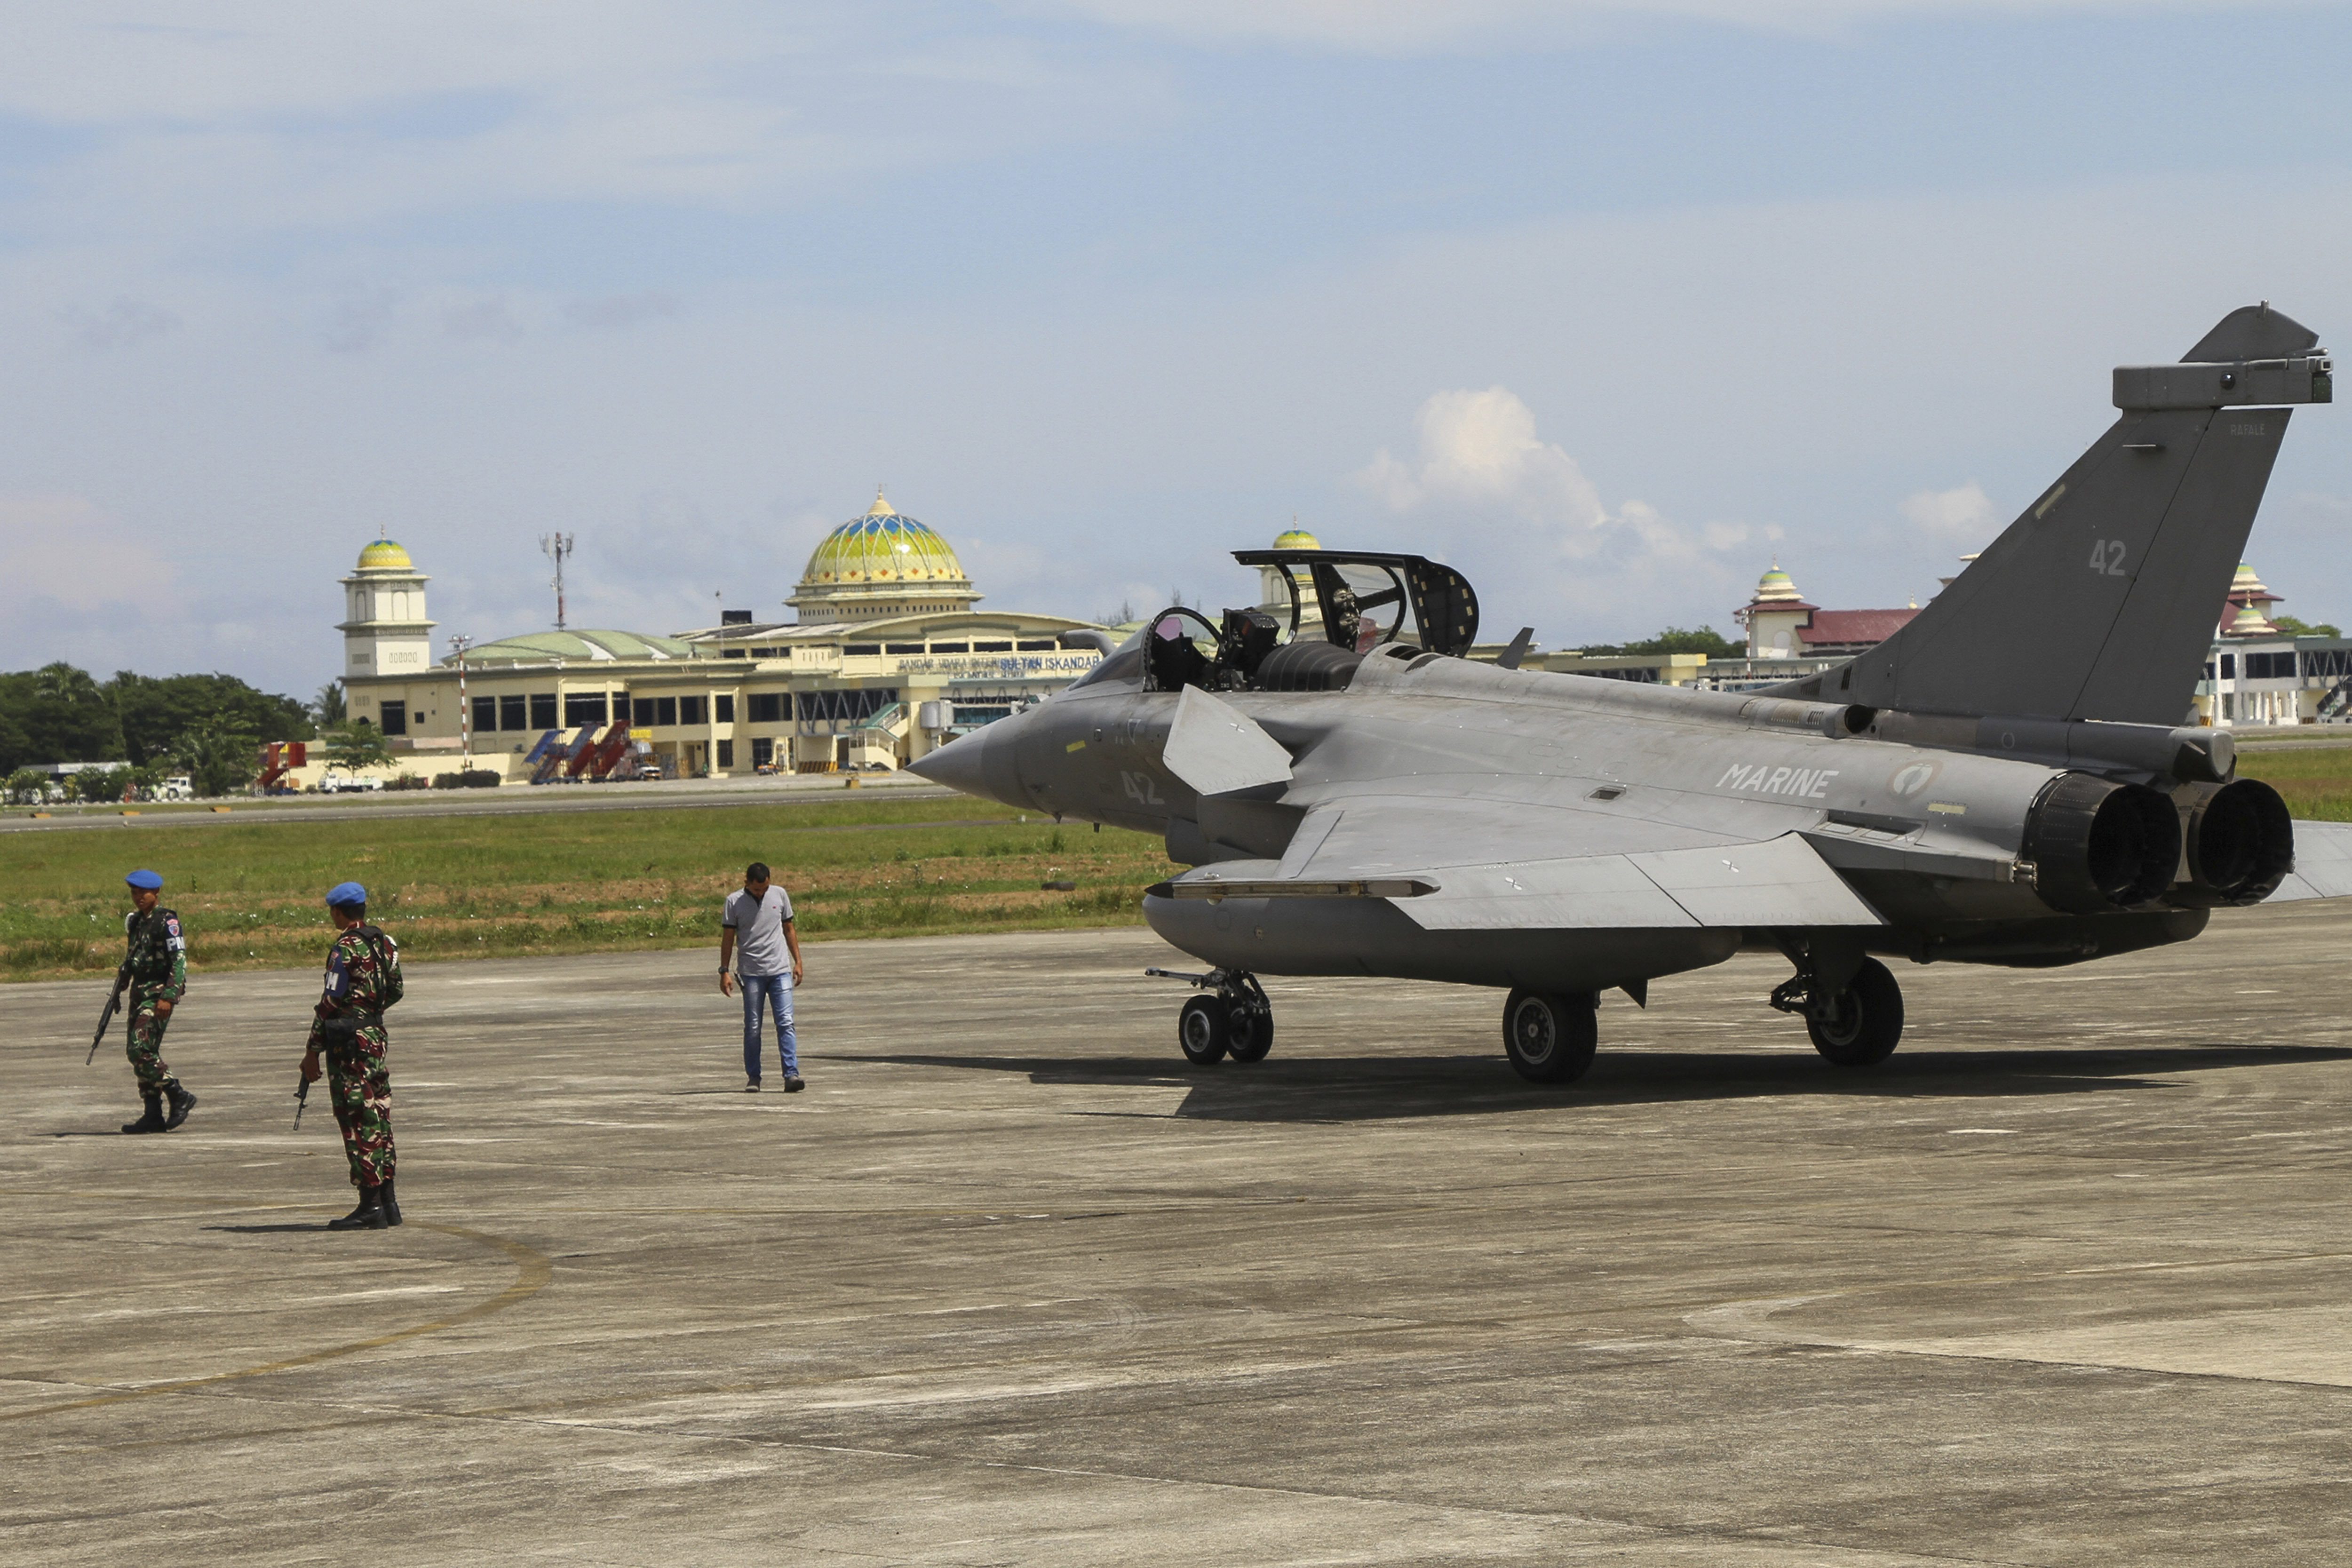 Indonesian military personnel stand guard near one of seven French Navy Rafale jet fighters parked on the tarmac at Sultan Iskandar Muda Air Base in Aceh Besar, Indonesia - PTI